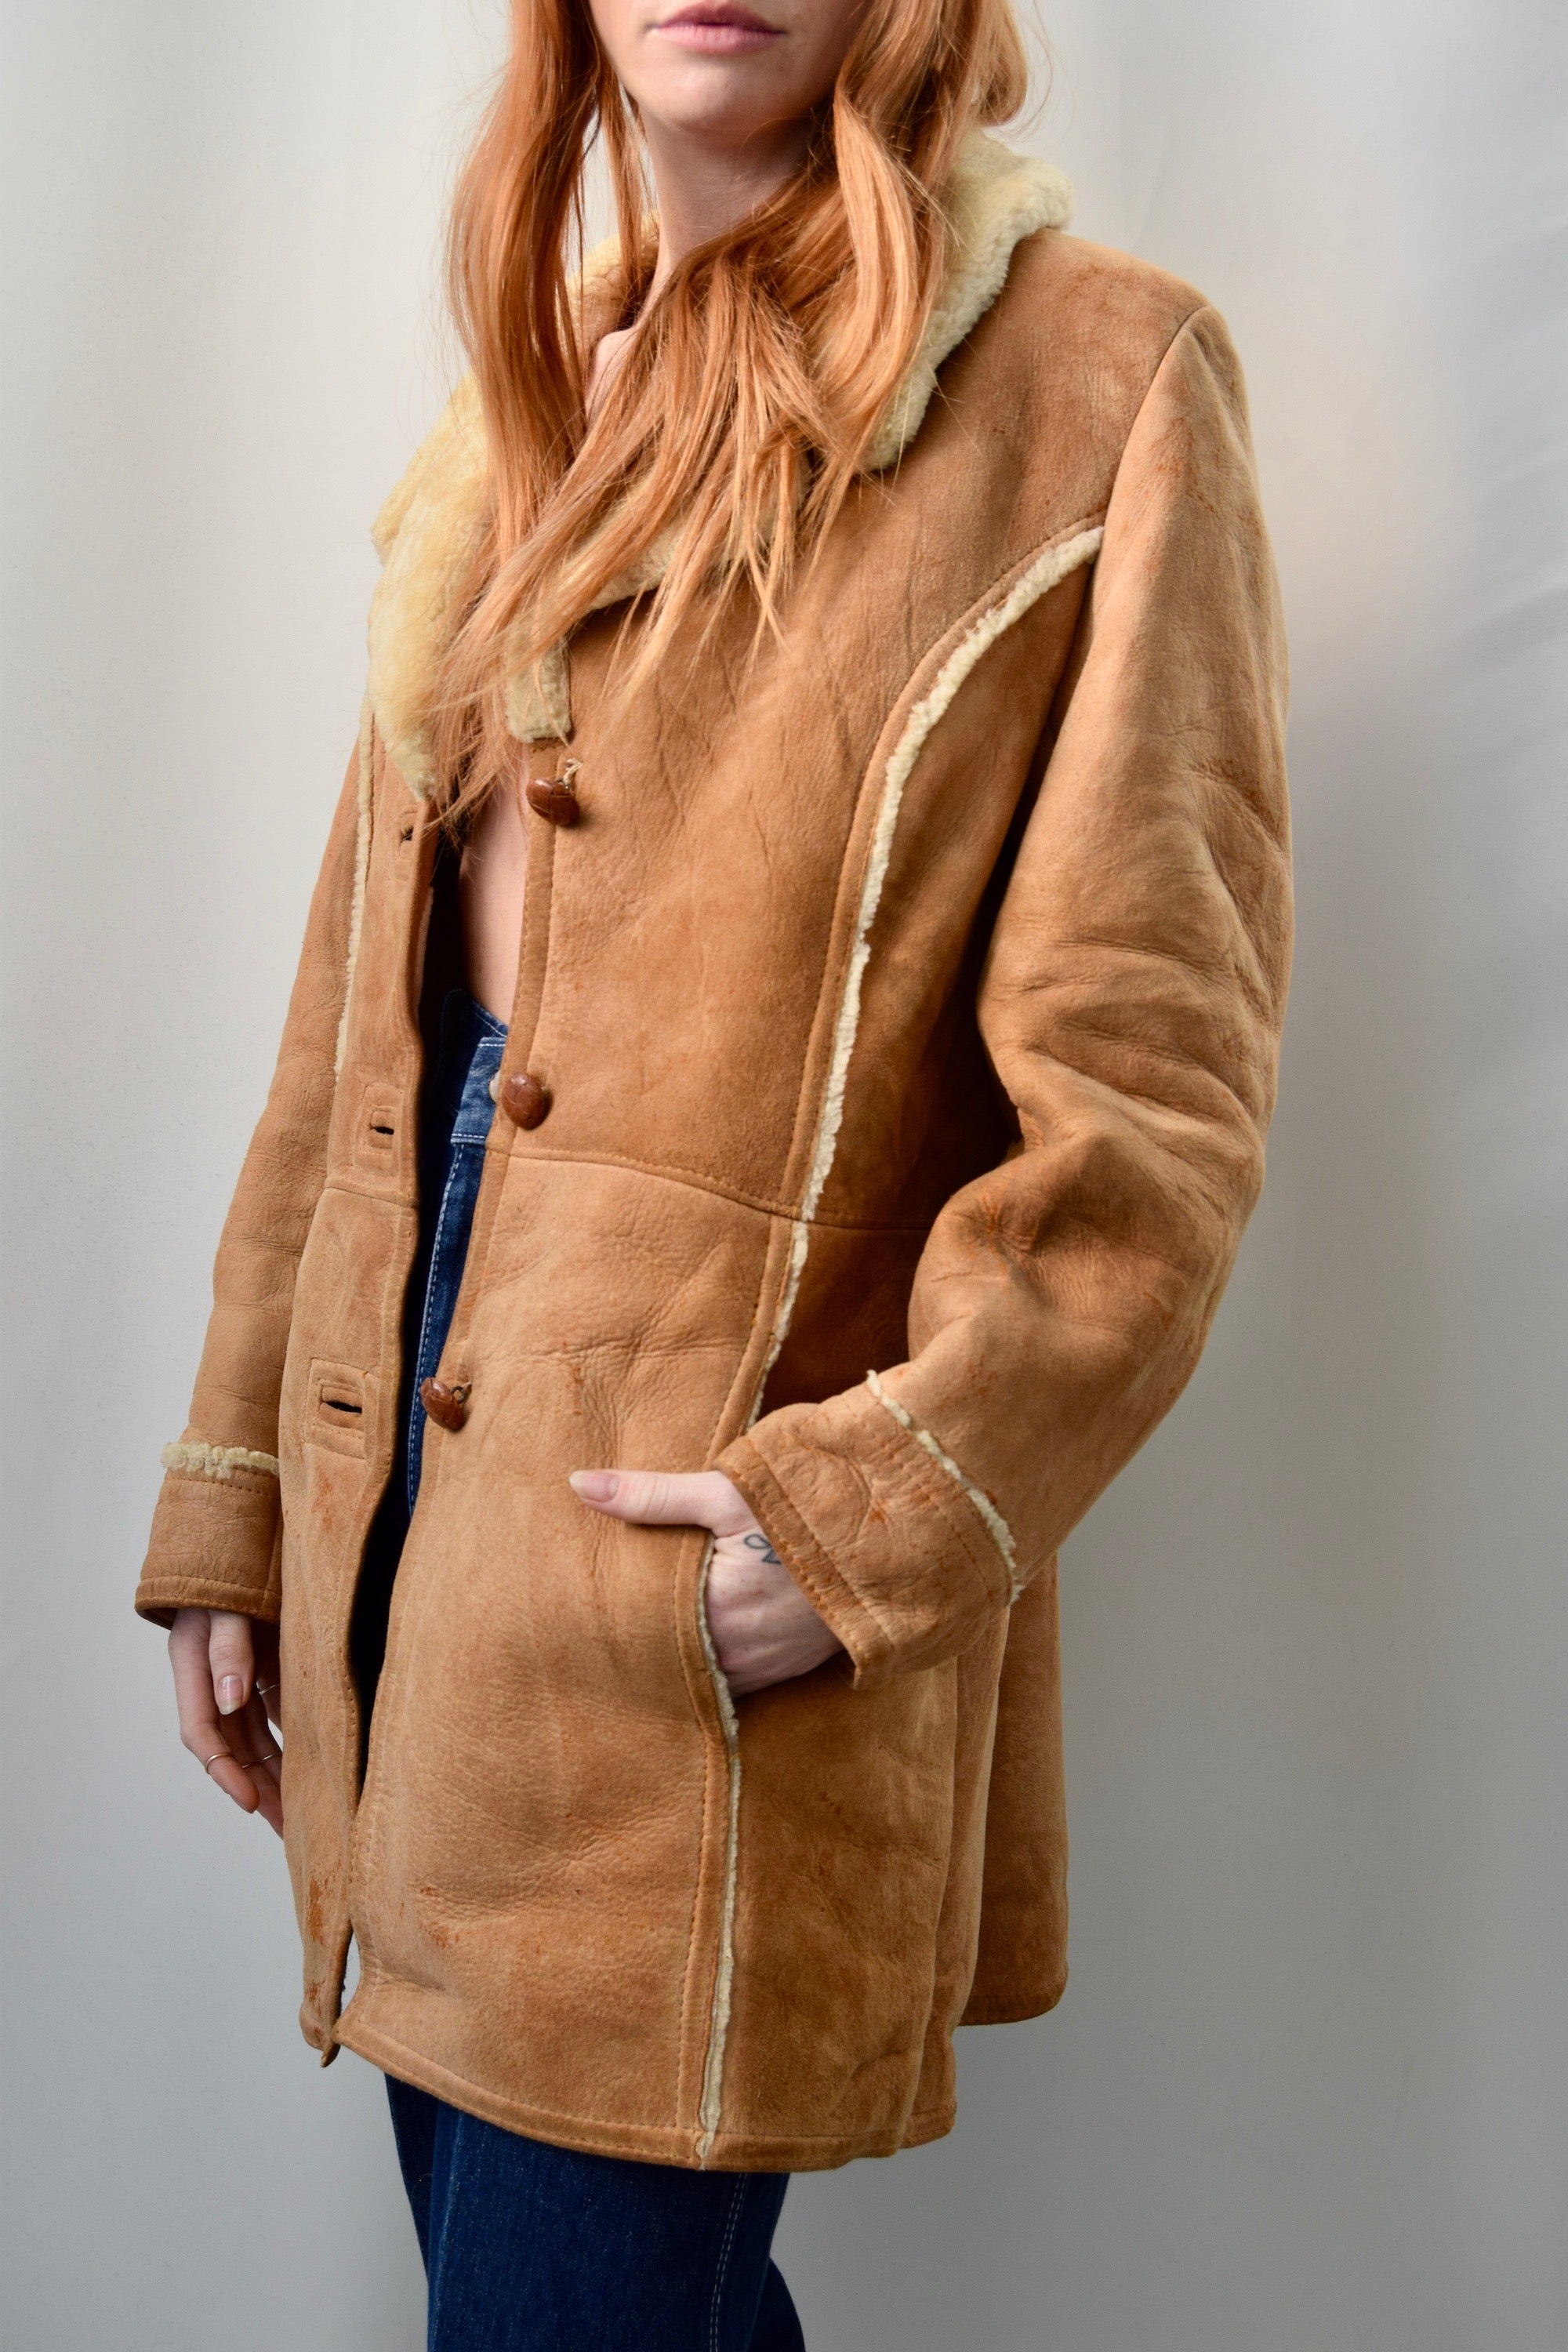 The Perfect Vintage Shearling